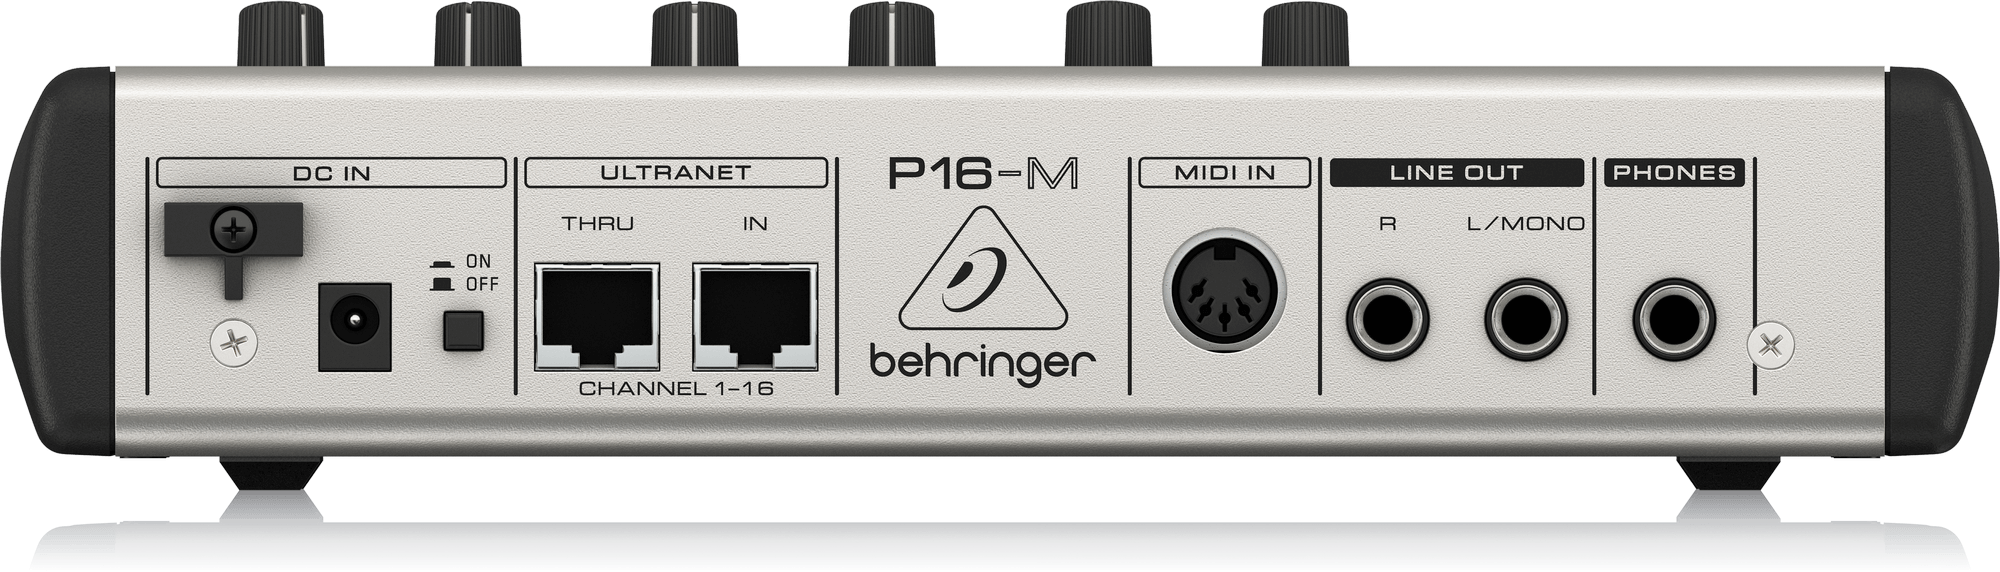 Behringer P16 Personal In Ear Monitor Mixers 